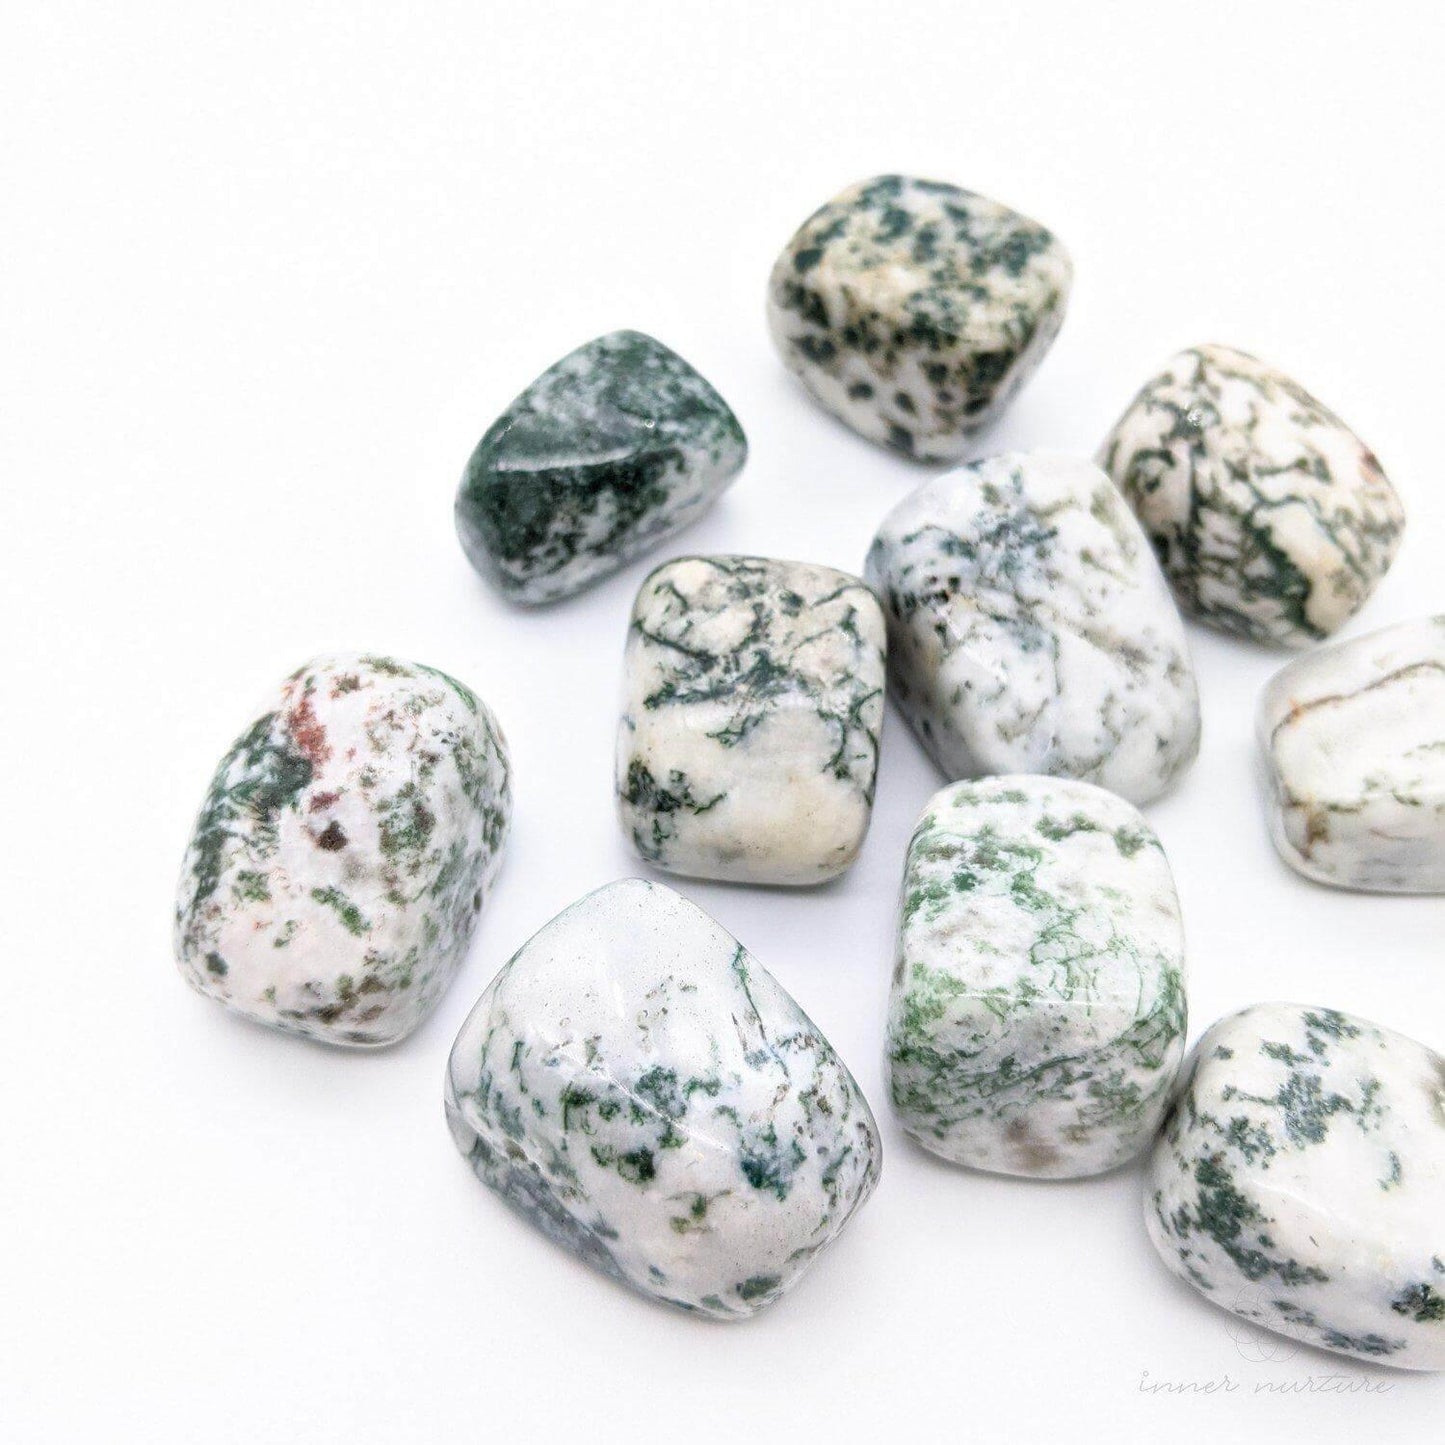 Tree Agate (Dendritic Agate) Tumble - Crystal Shop Australia | Inner Nurture - Ethically Sourced - Buy Crystals Online